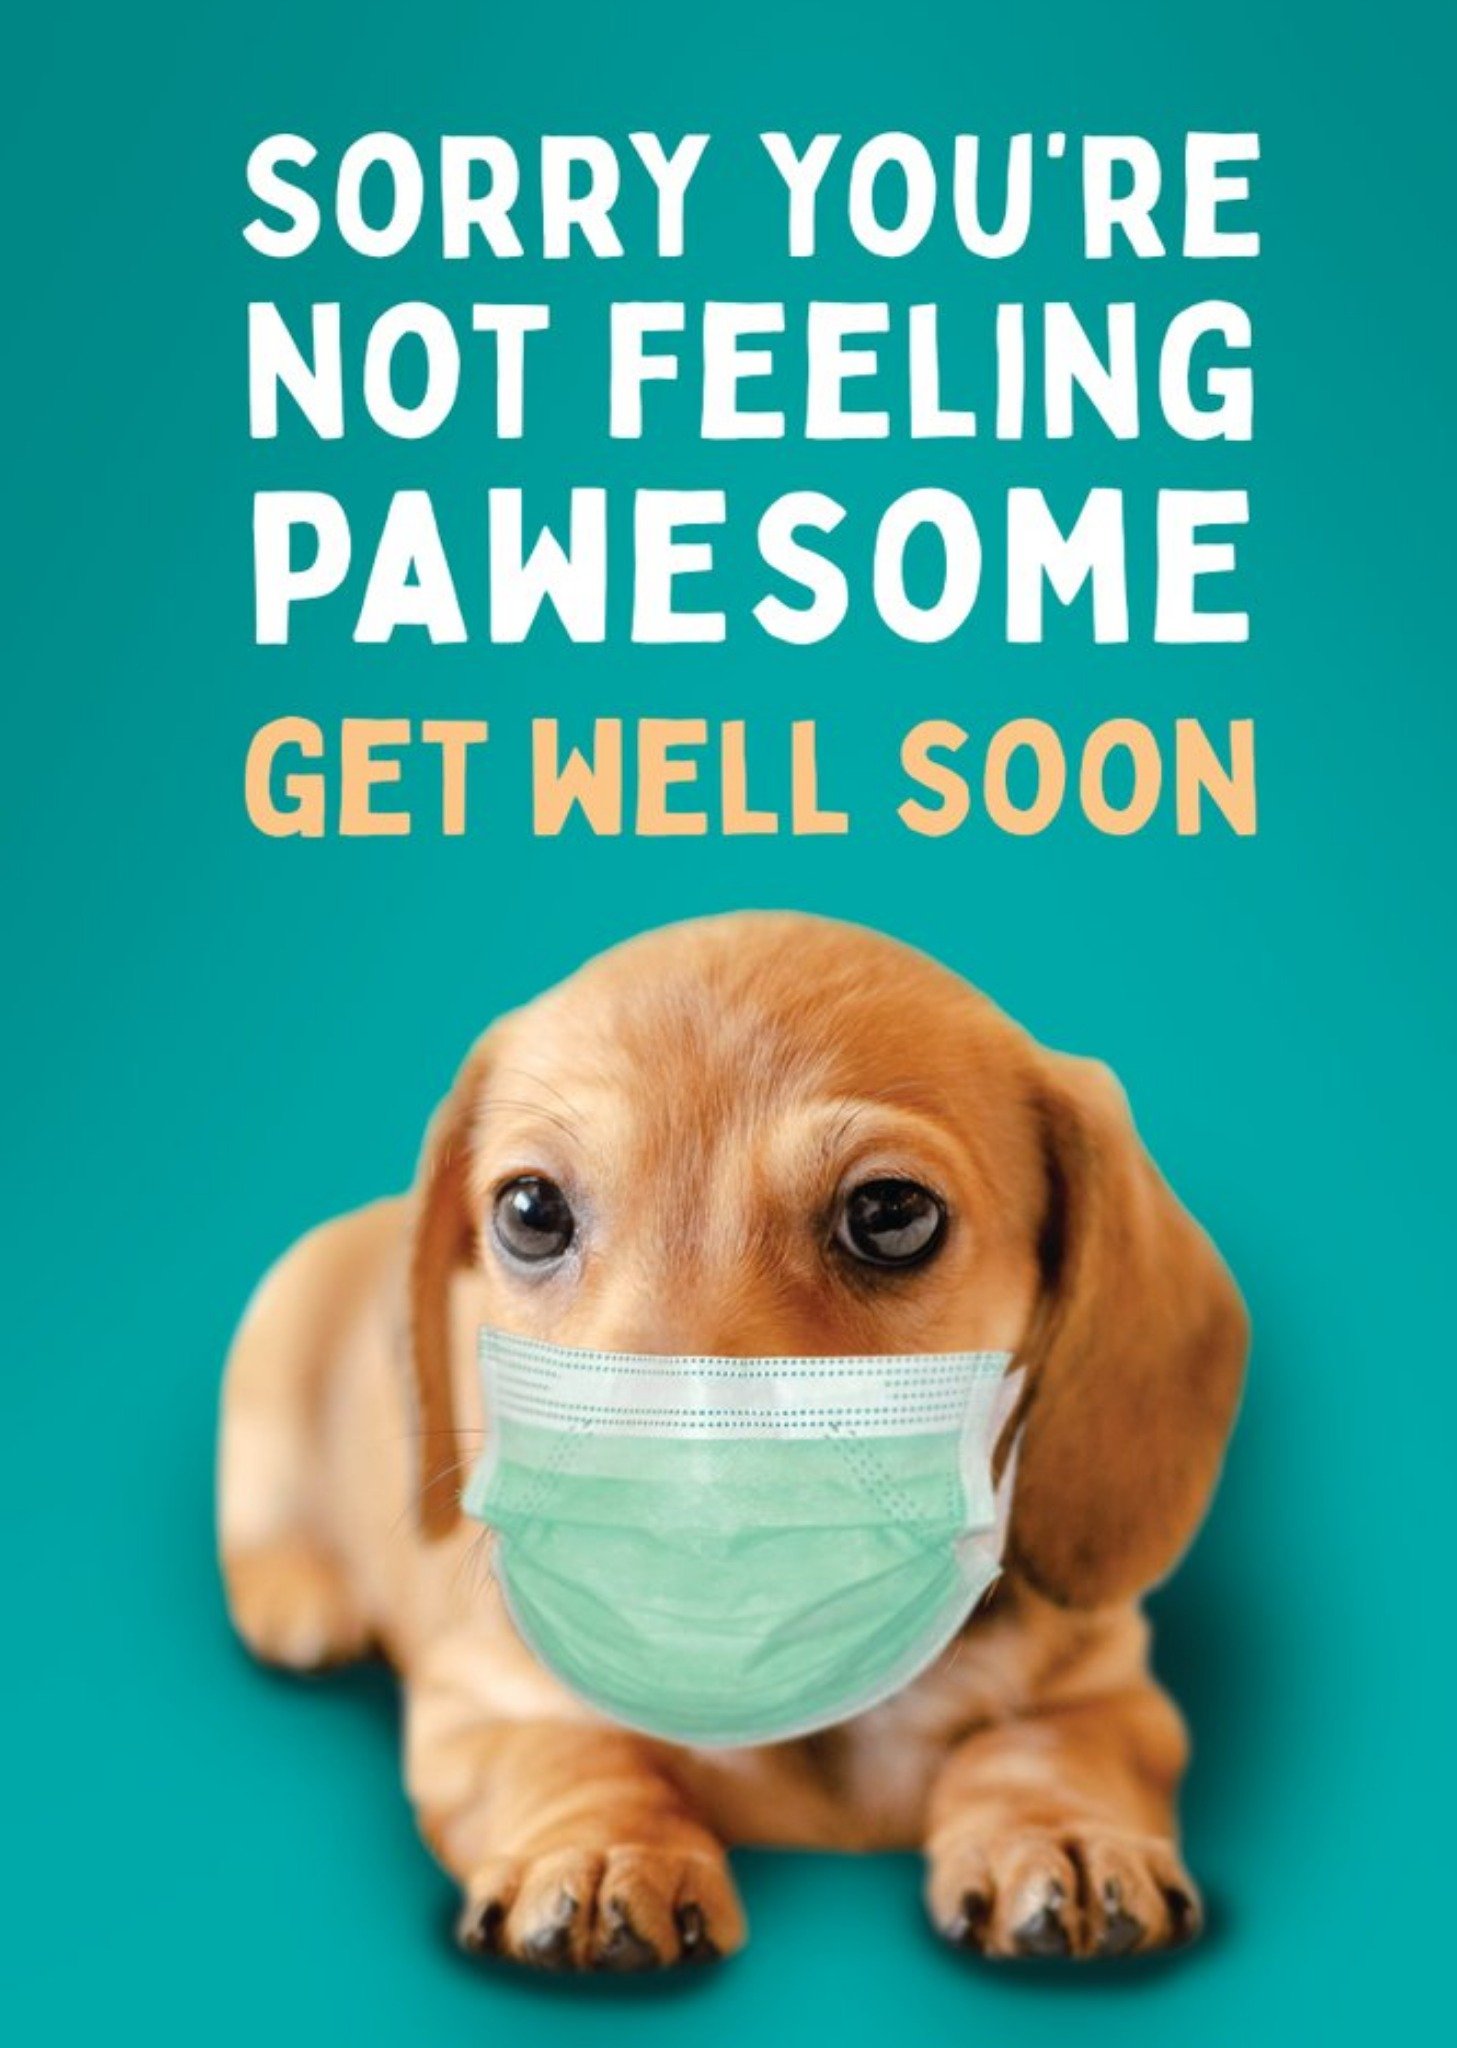 Moonpig Dog Mask Covid Sorry You Are Not Feeling Pawesome Get Well Soon Card Ecard